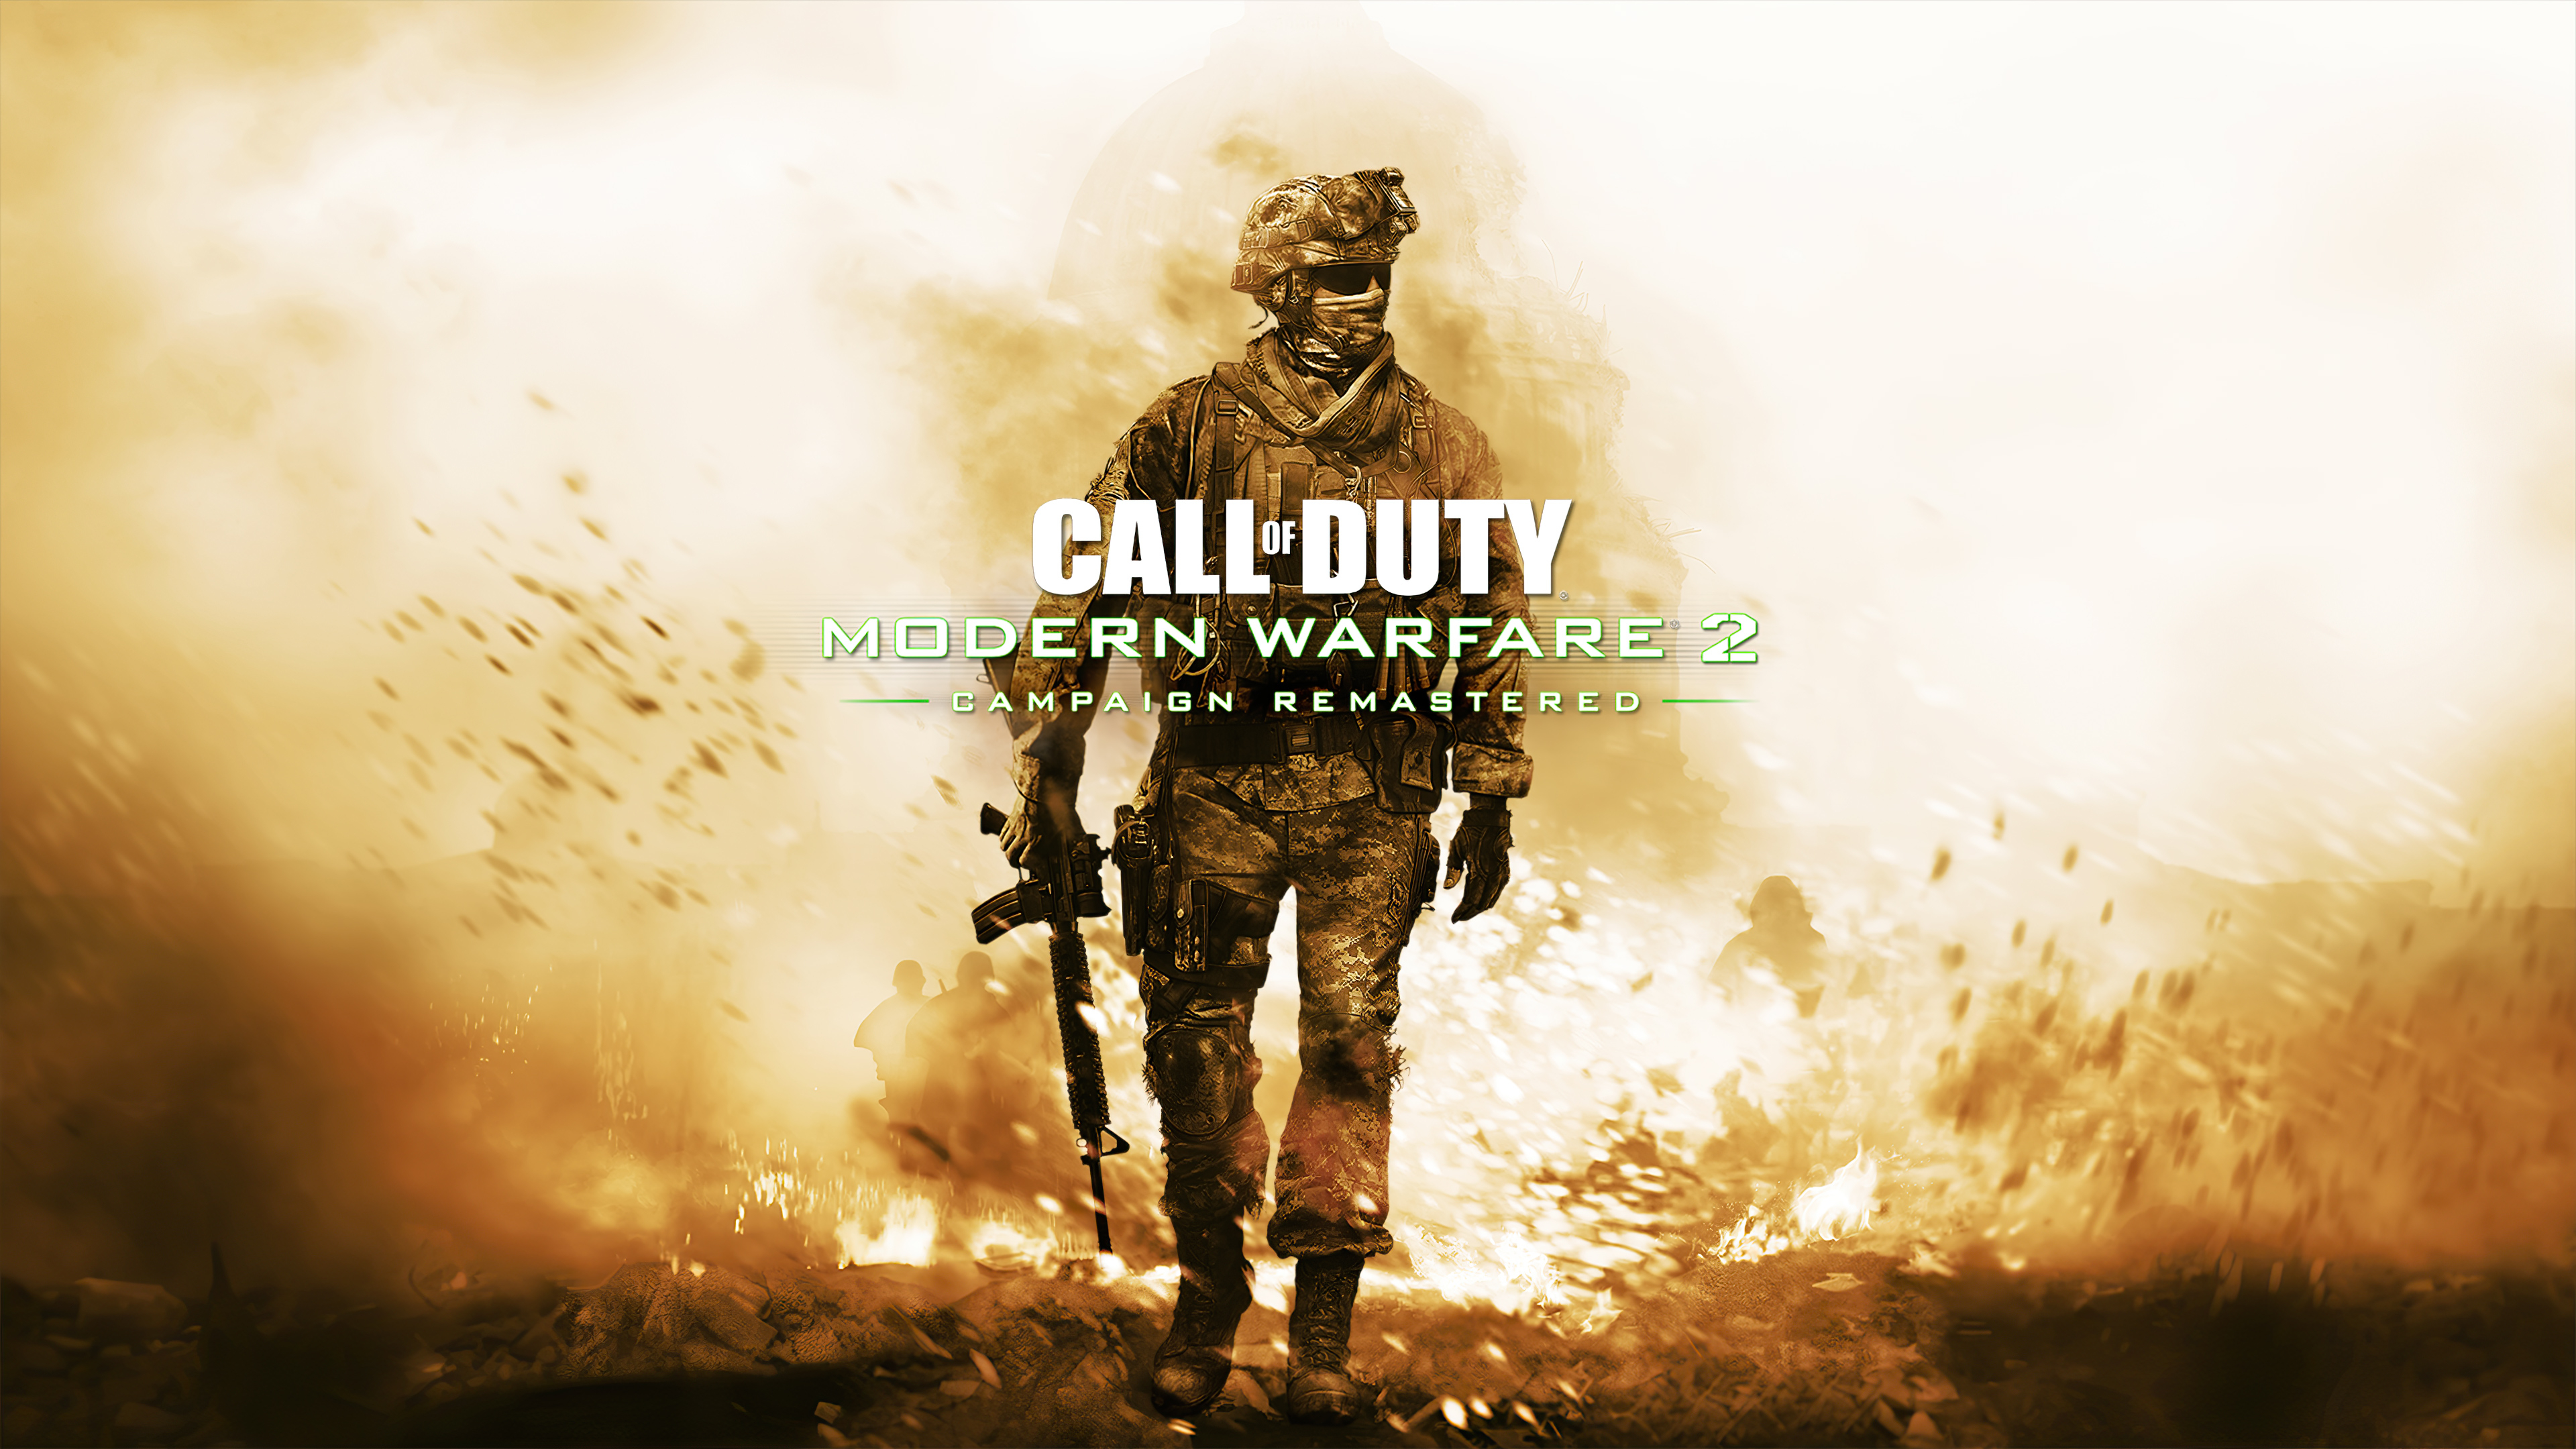 3840x2160 Call Of Duty Modern Warfare 2 Campaign Remastered 4k, HD Games, 4k Wallpapers, Images, Backgrounds, Photos and Pictures